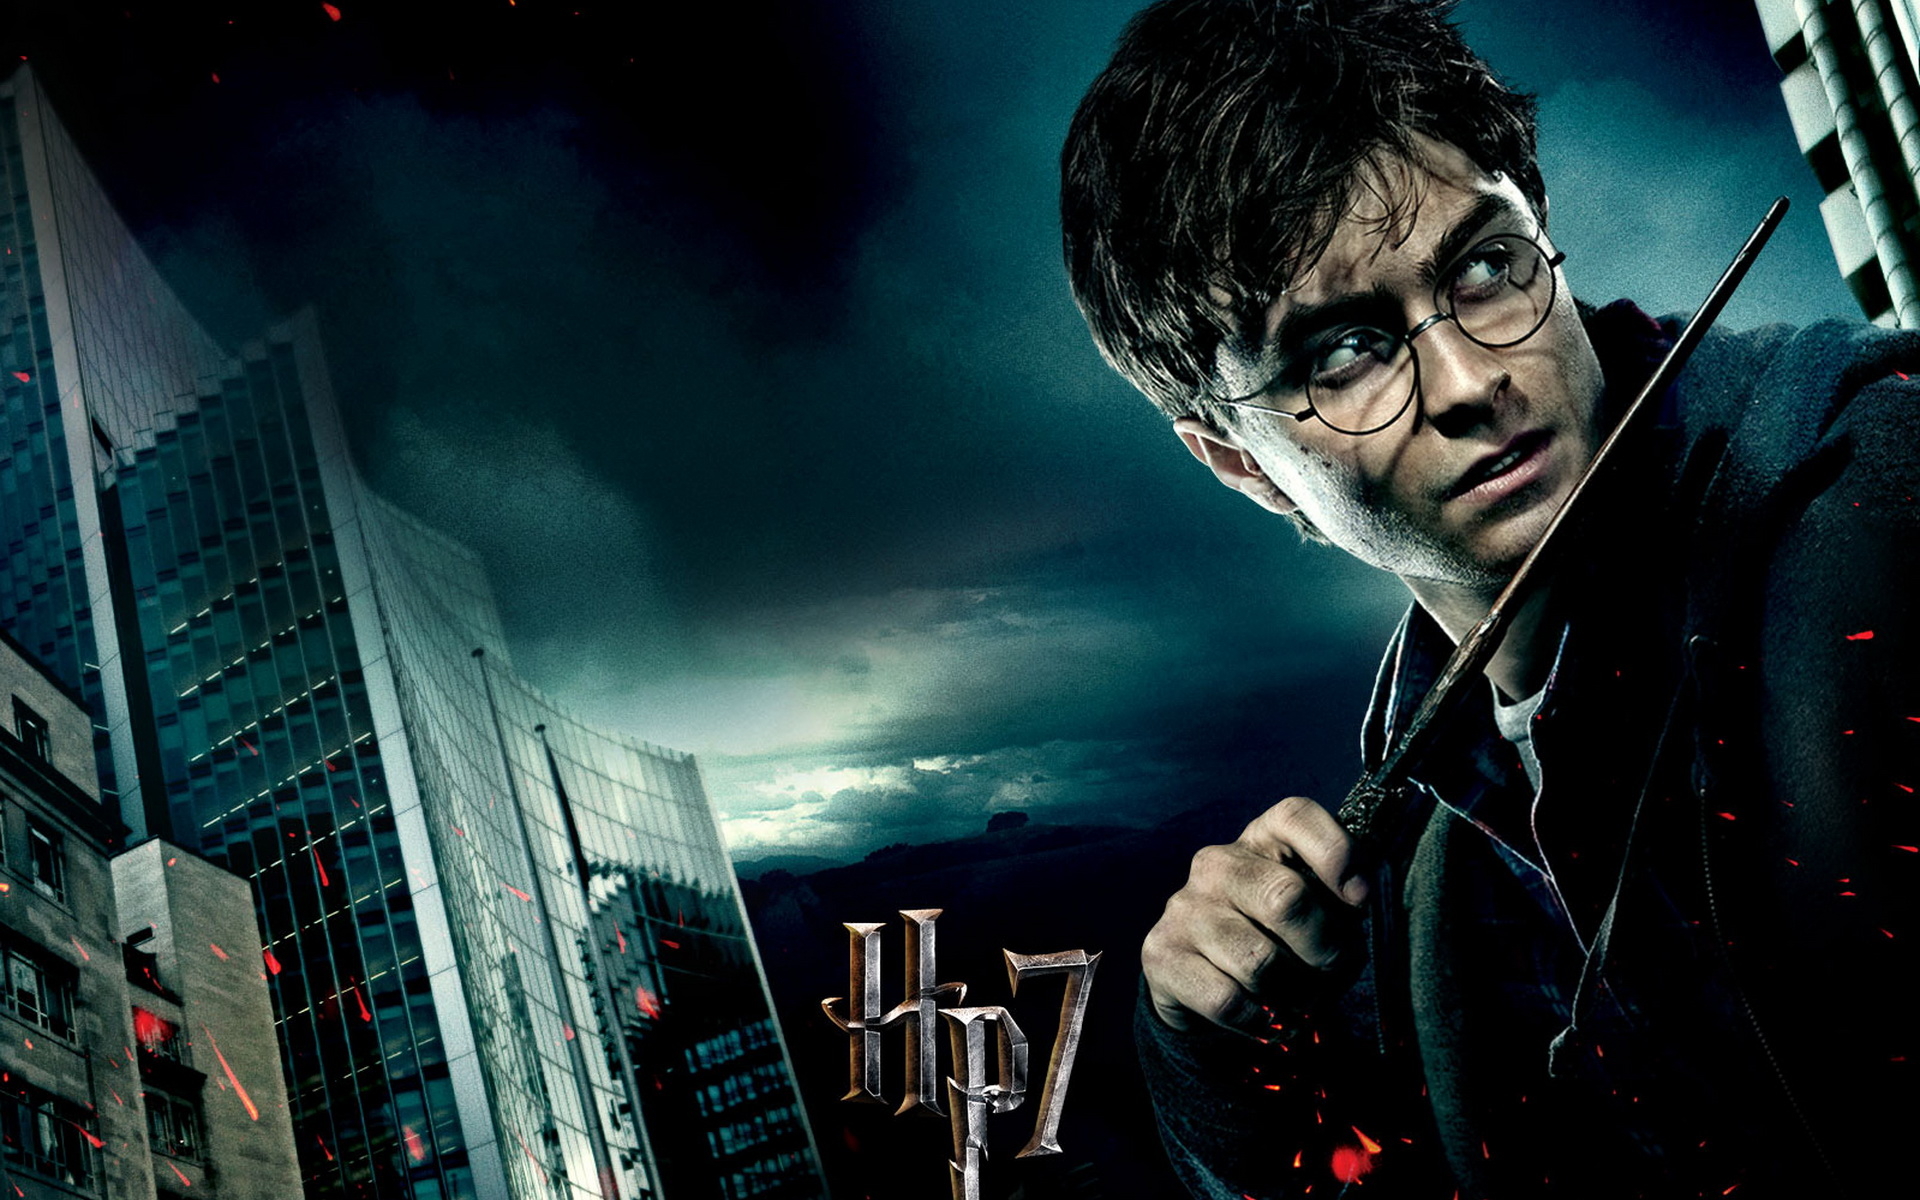 HQ Harry Potter And The Deathly Hallows: Part 1 Wallpapers | File 1162.61Kb